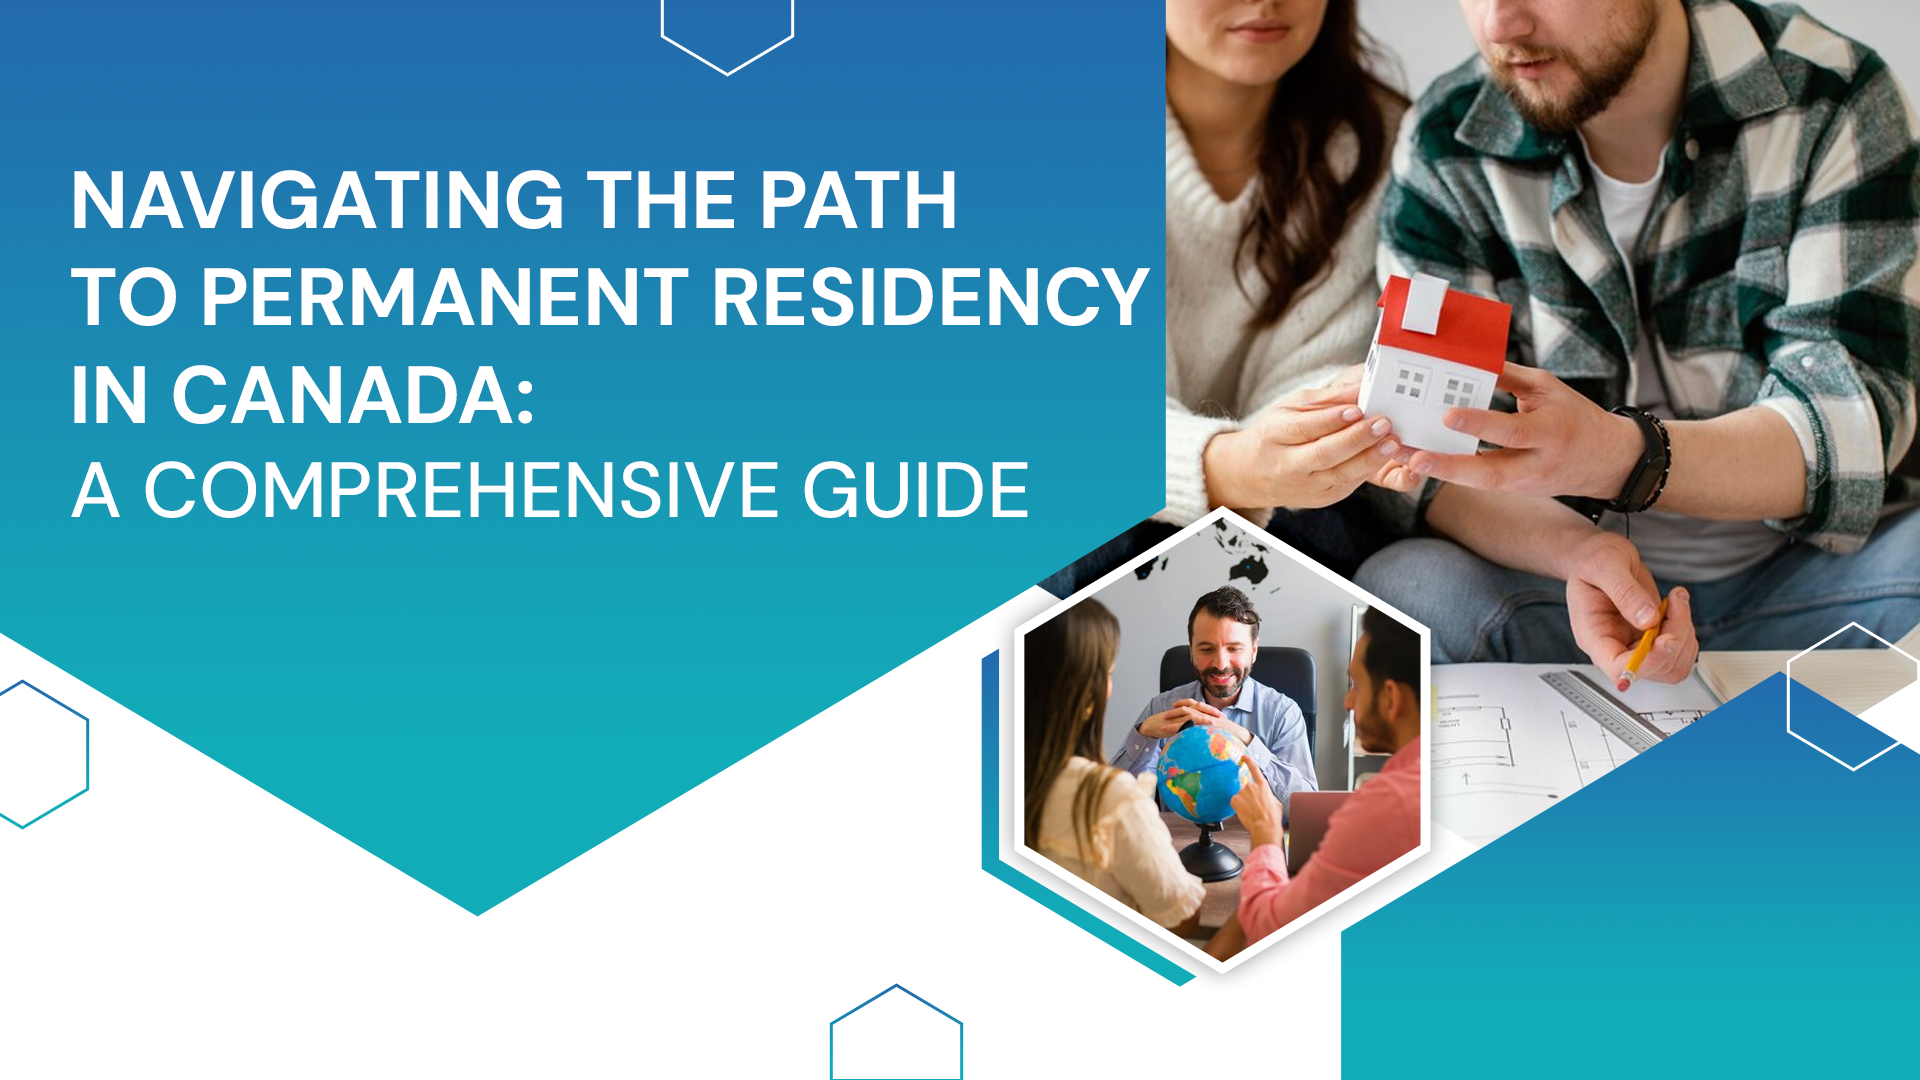 Navigating the Path to Permanent Residency in Canada: A Comprehensive Guide